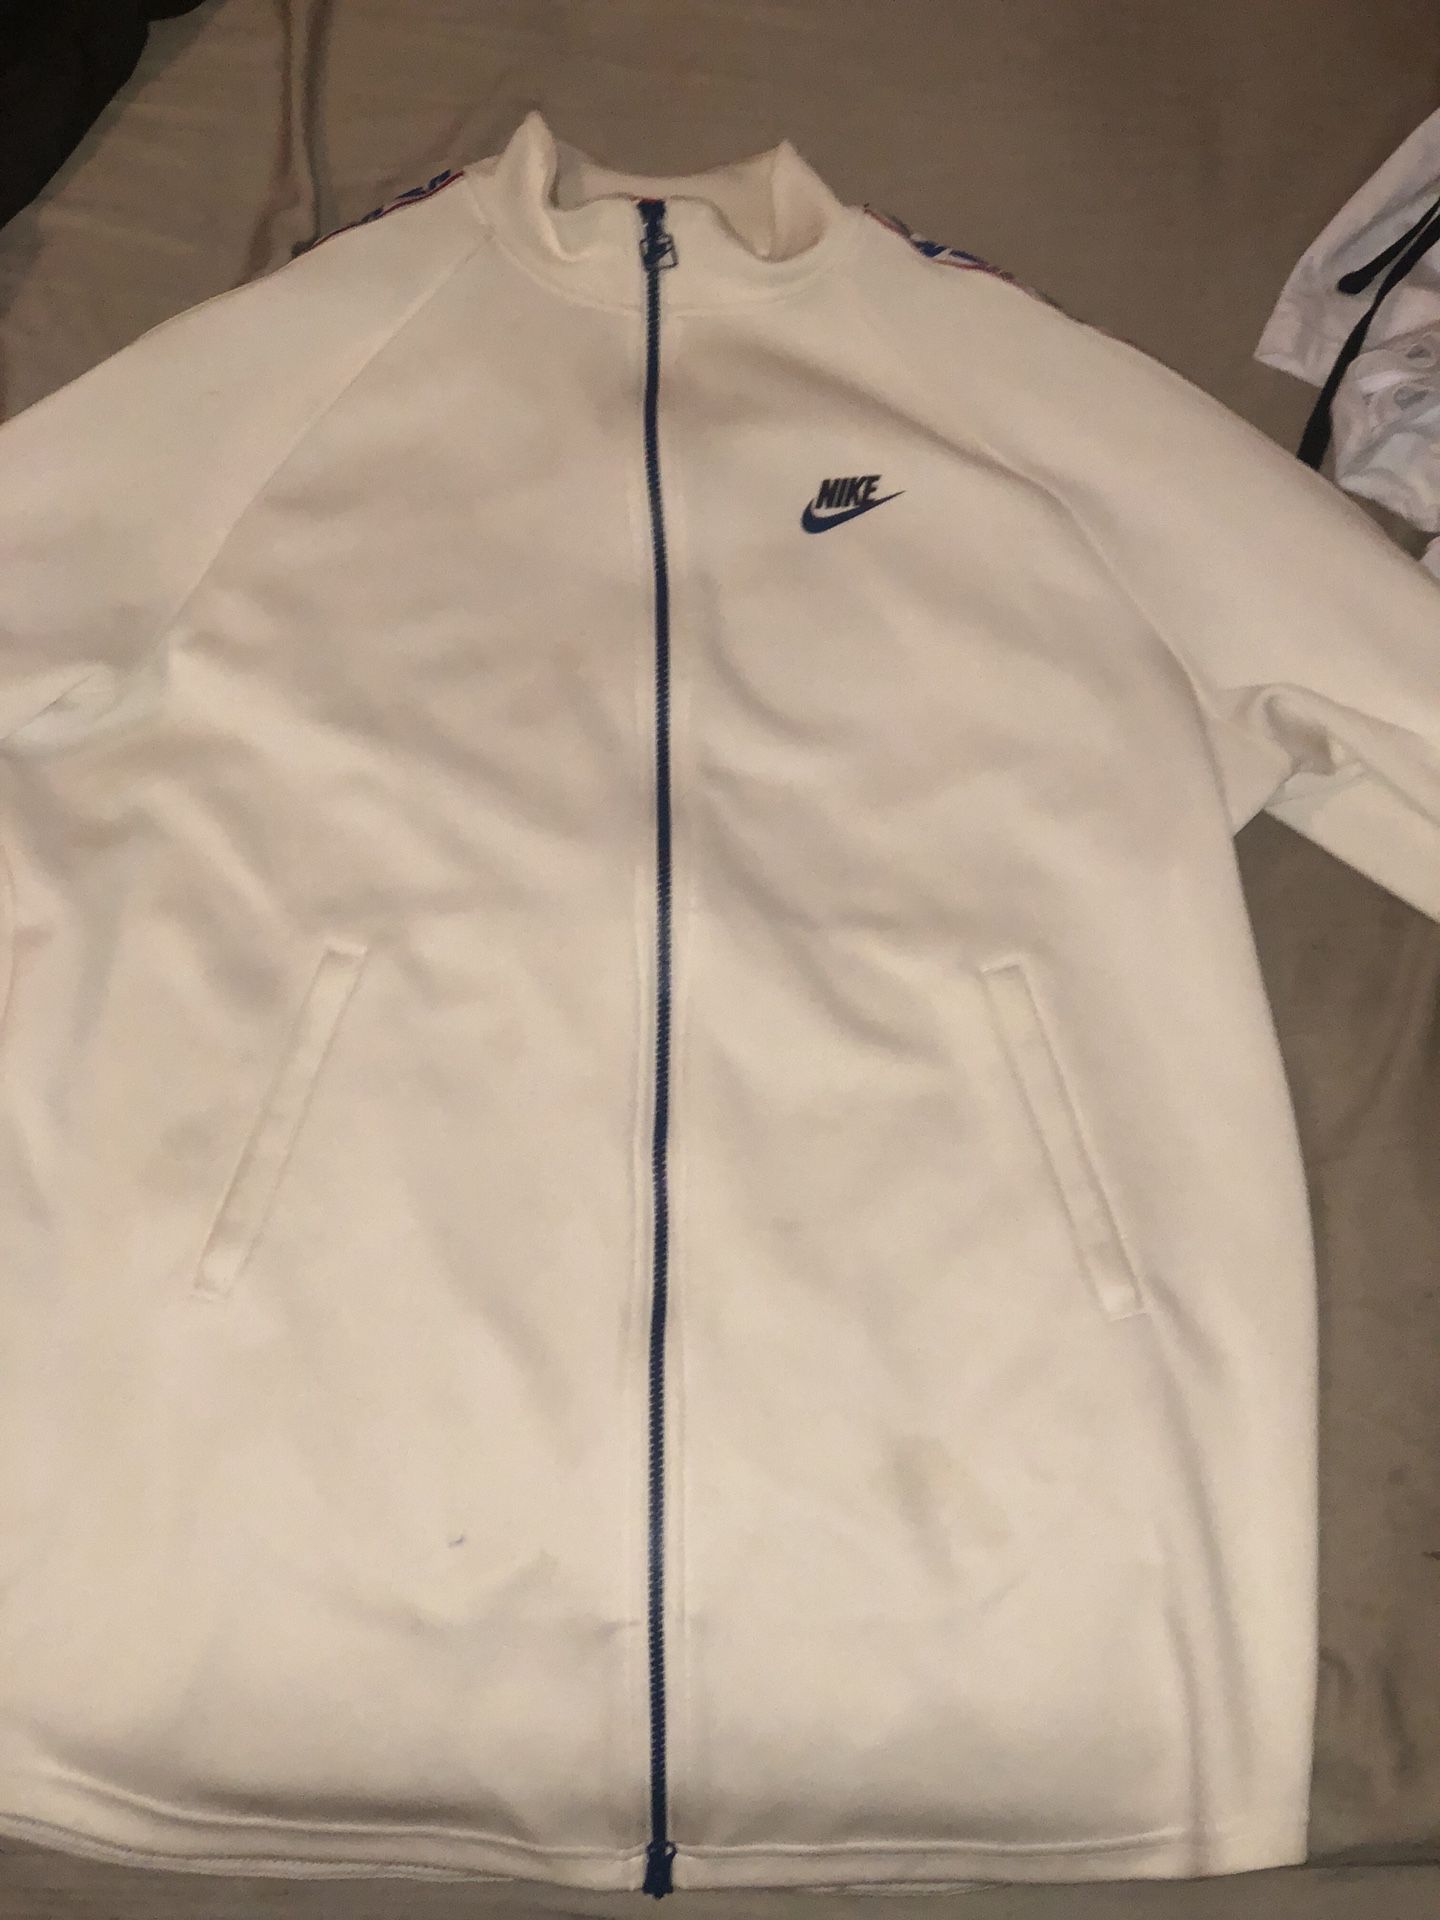 2018 Nike track suit XL